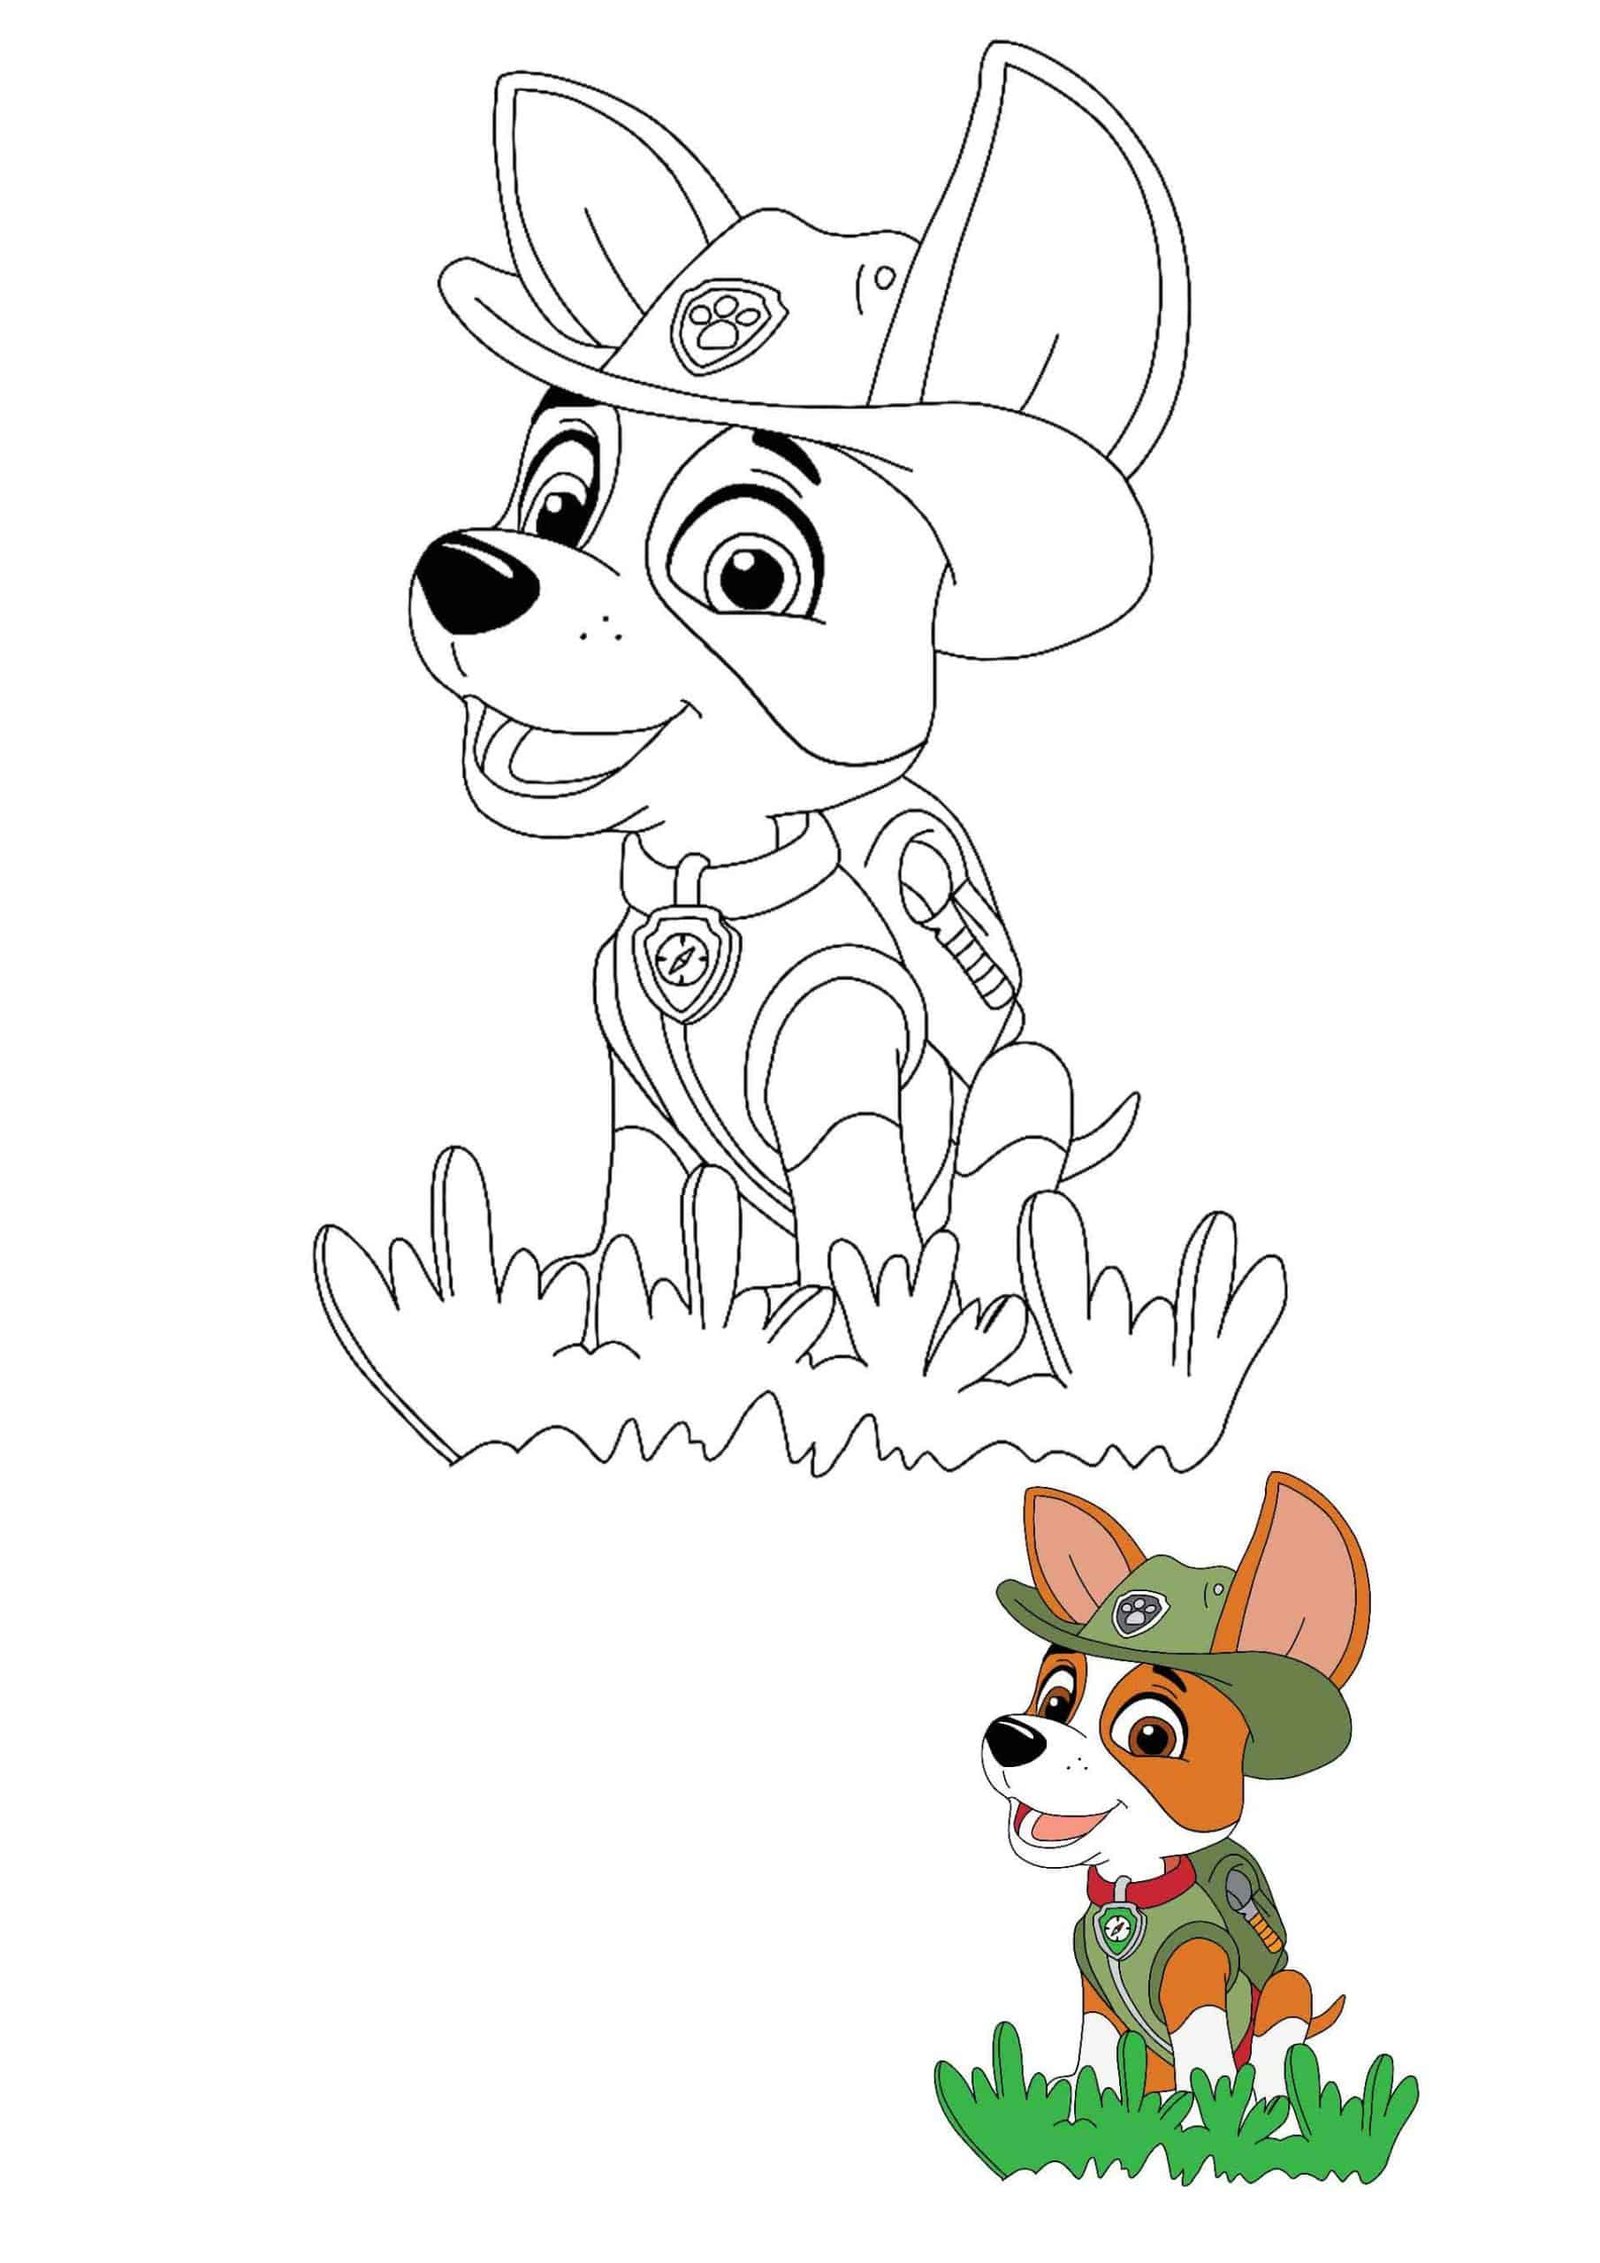 Paw Patrol Tracker coloring sheet with a preview